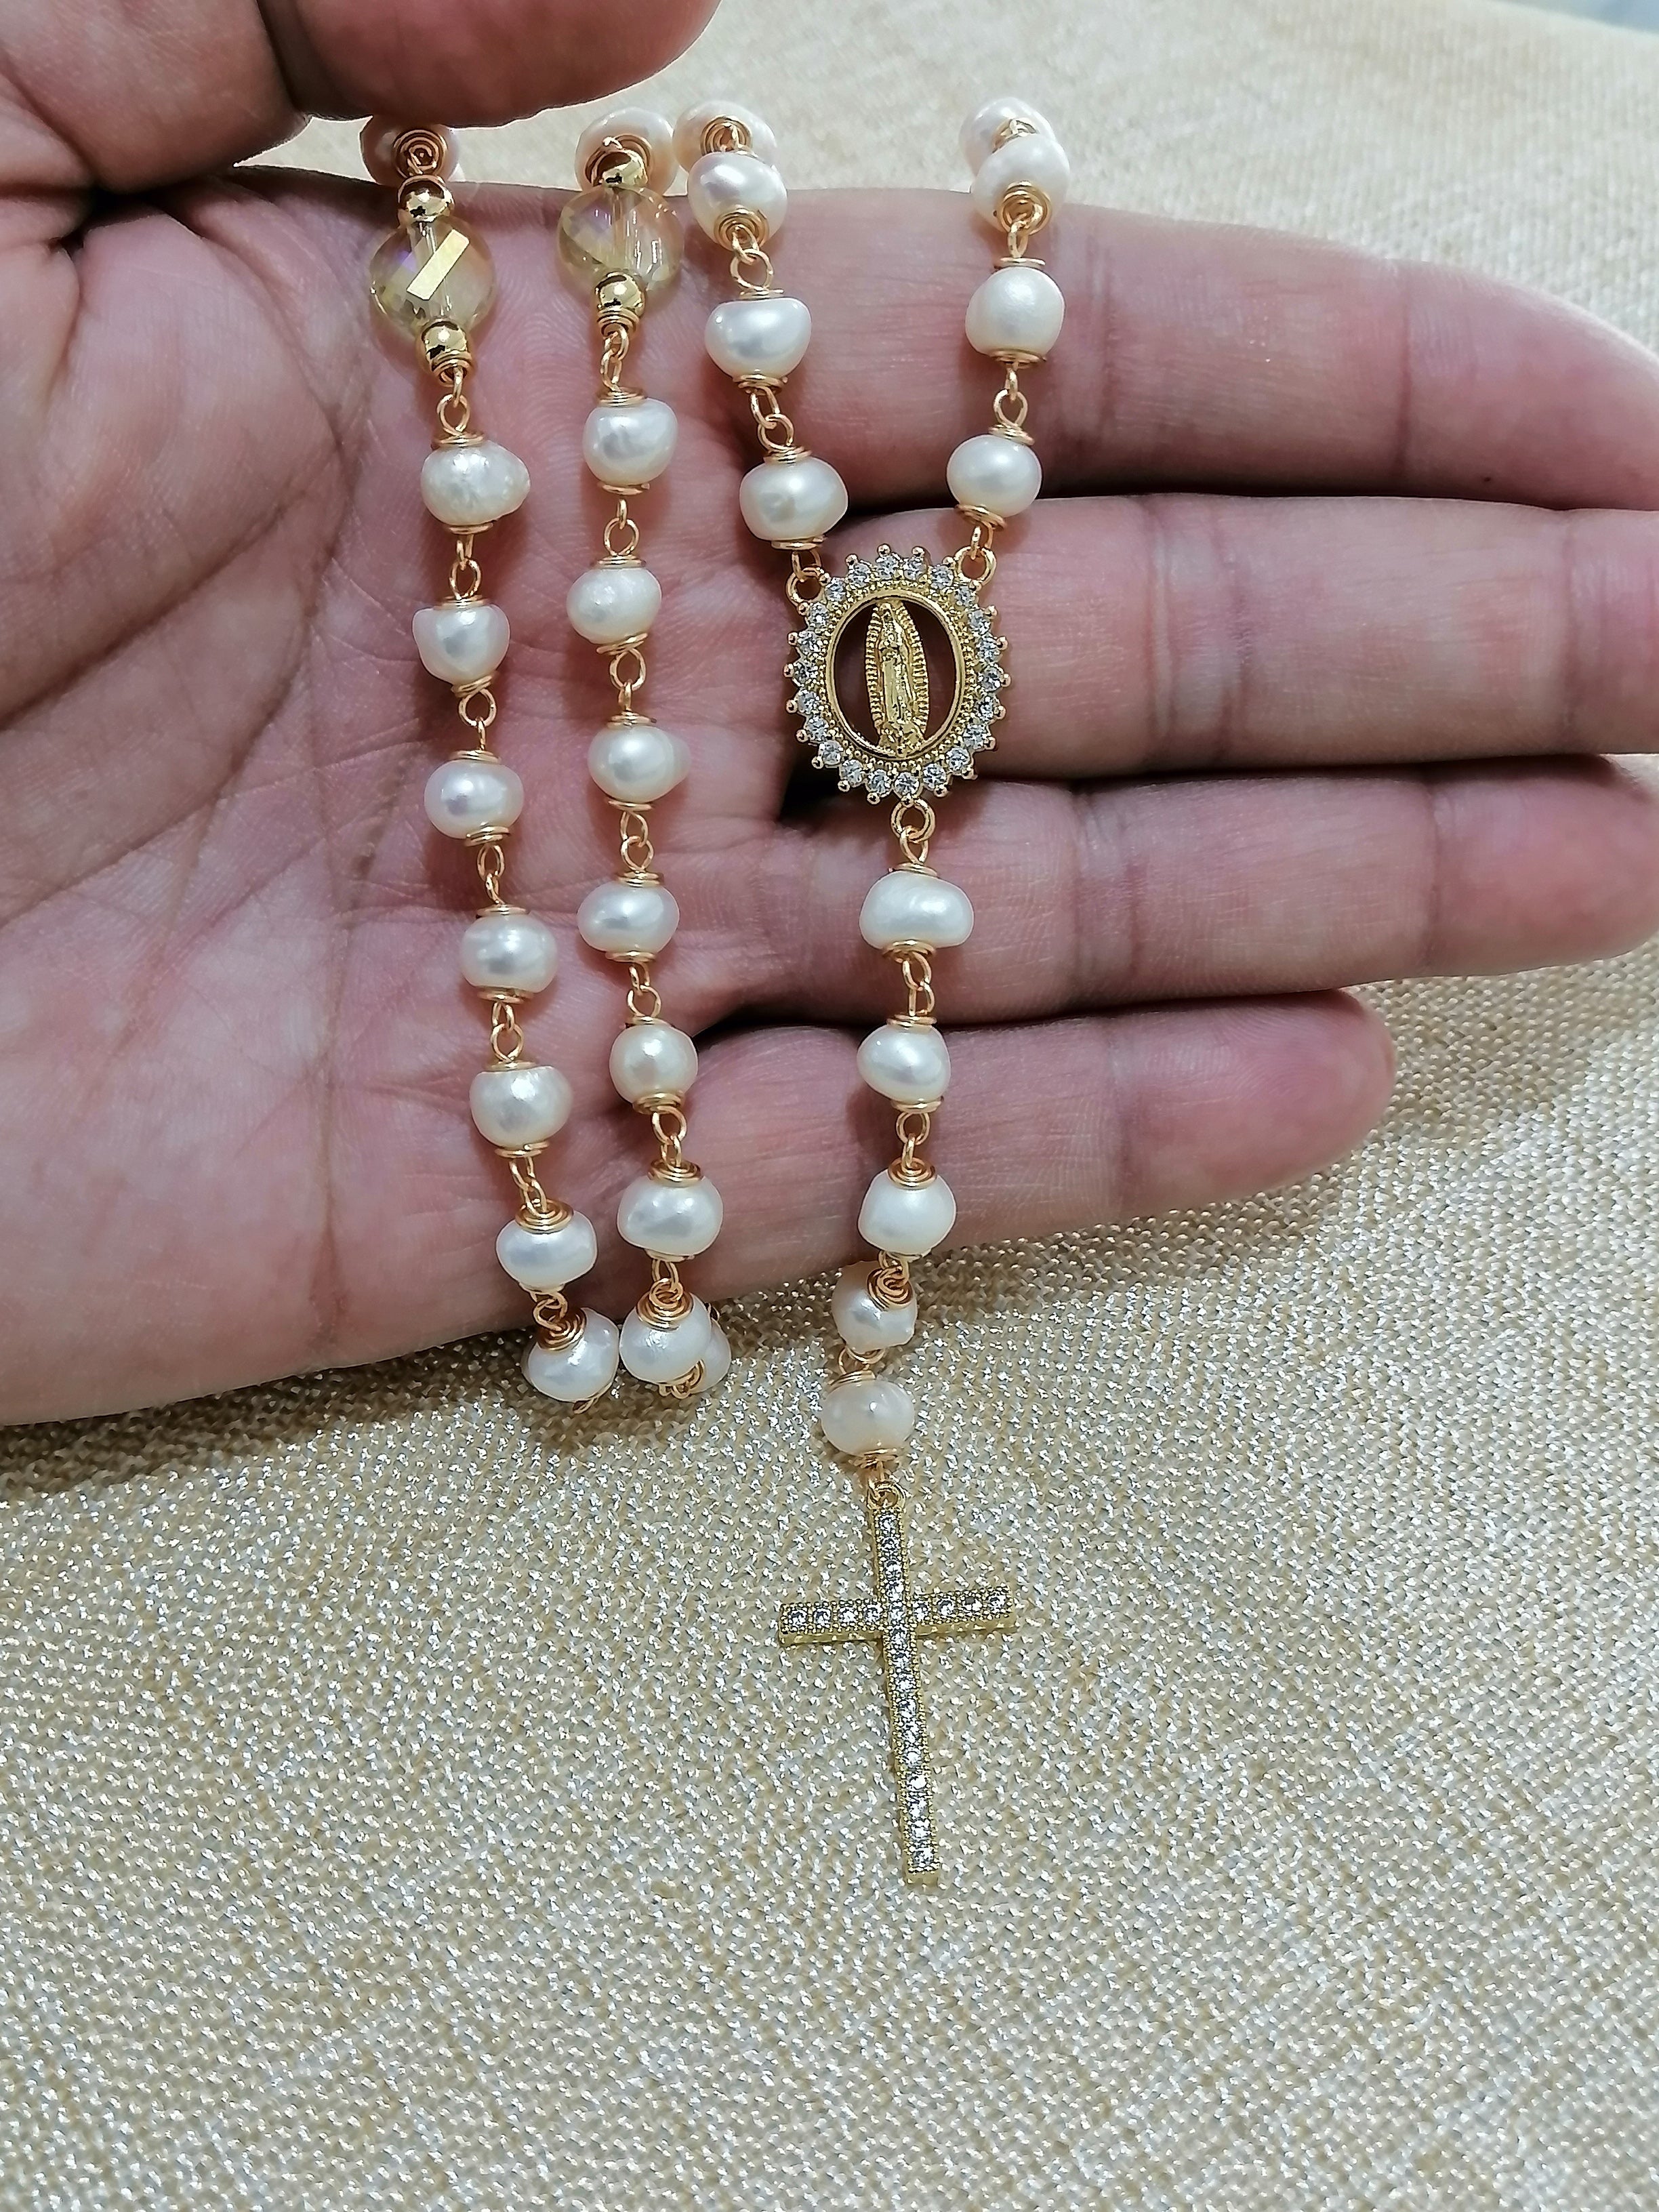 White Mother of Pearl Rosary, 5 decades, Men Rosary India | Ubuy